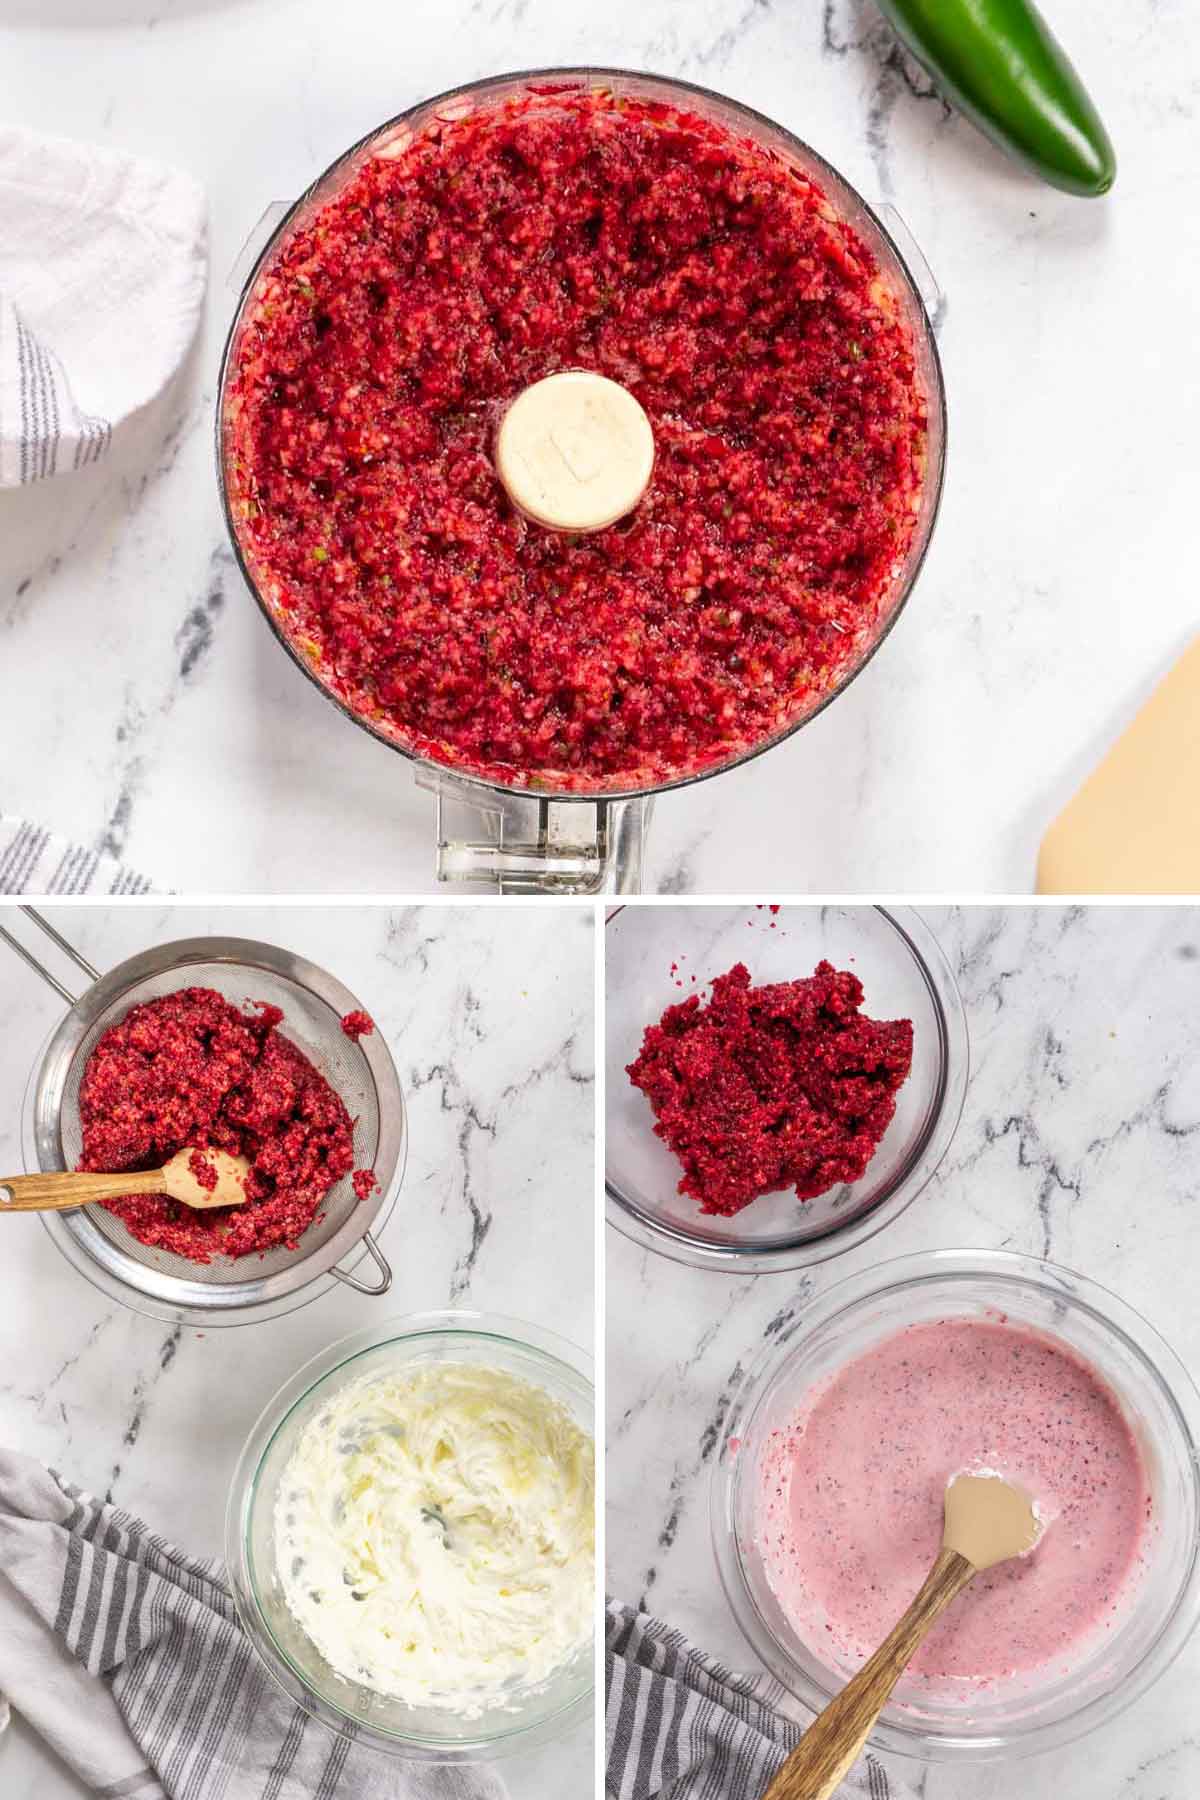 Chopping cranberries in a food processor and stirring into cream cheese.